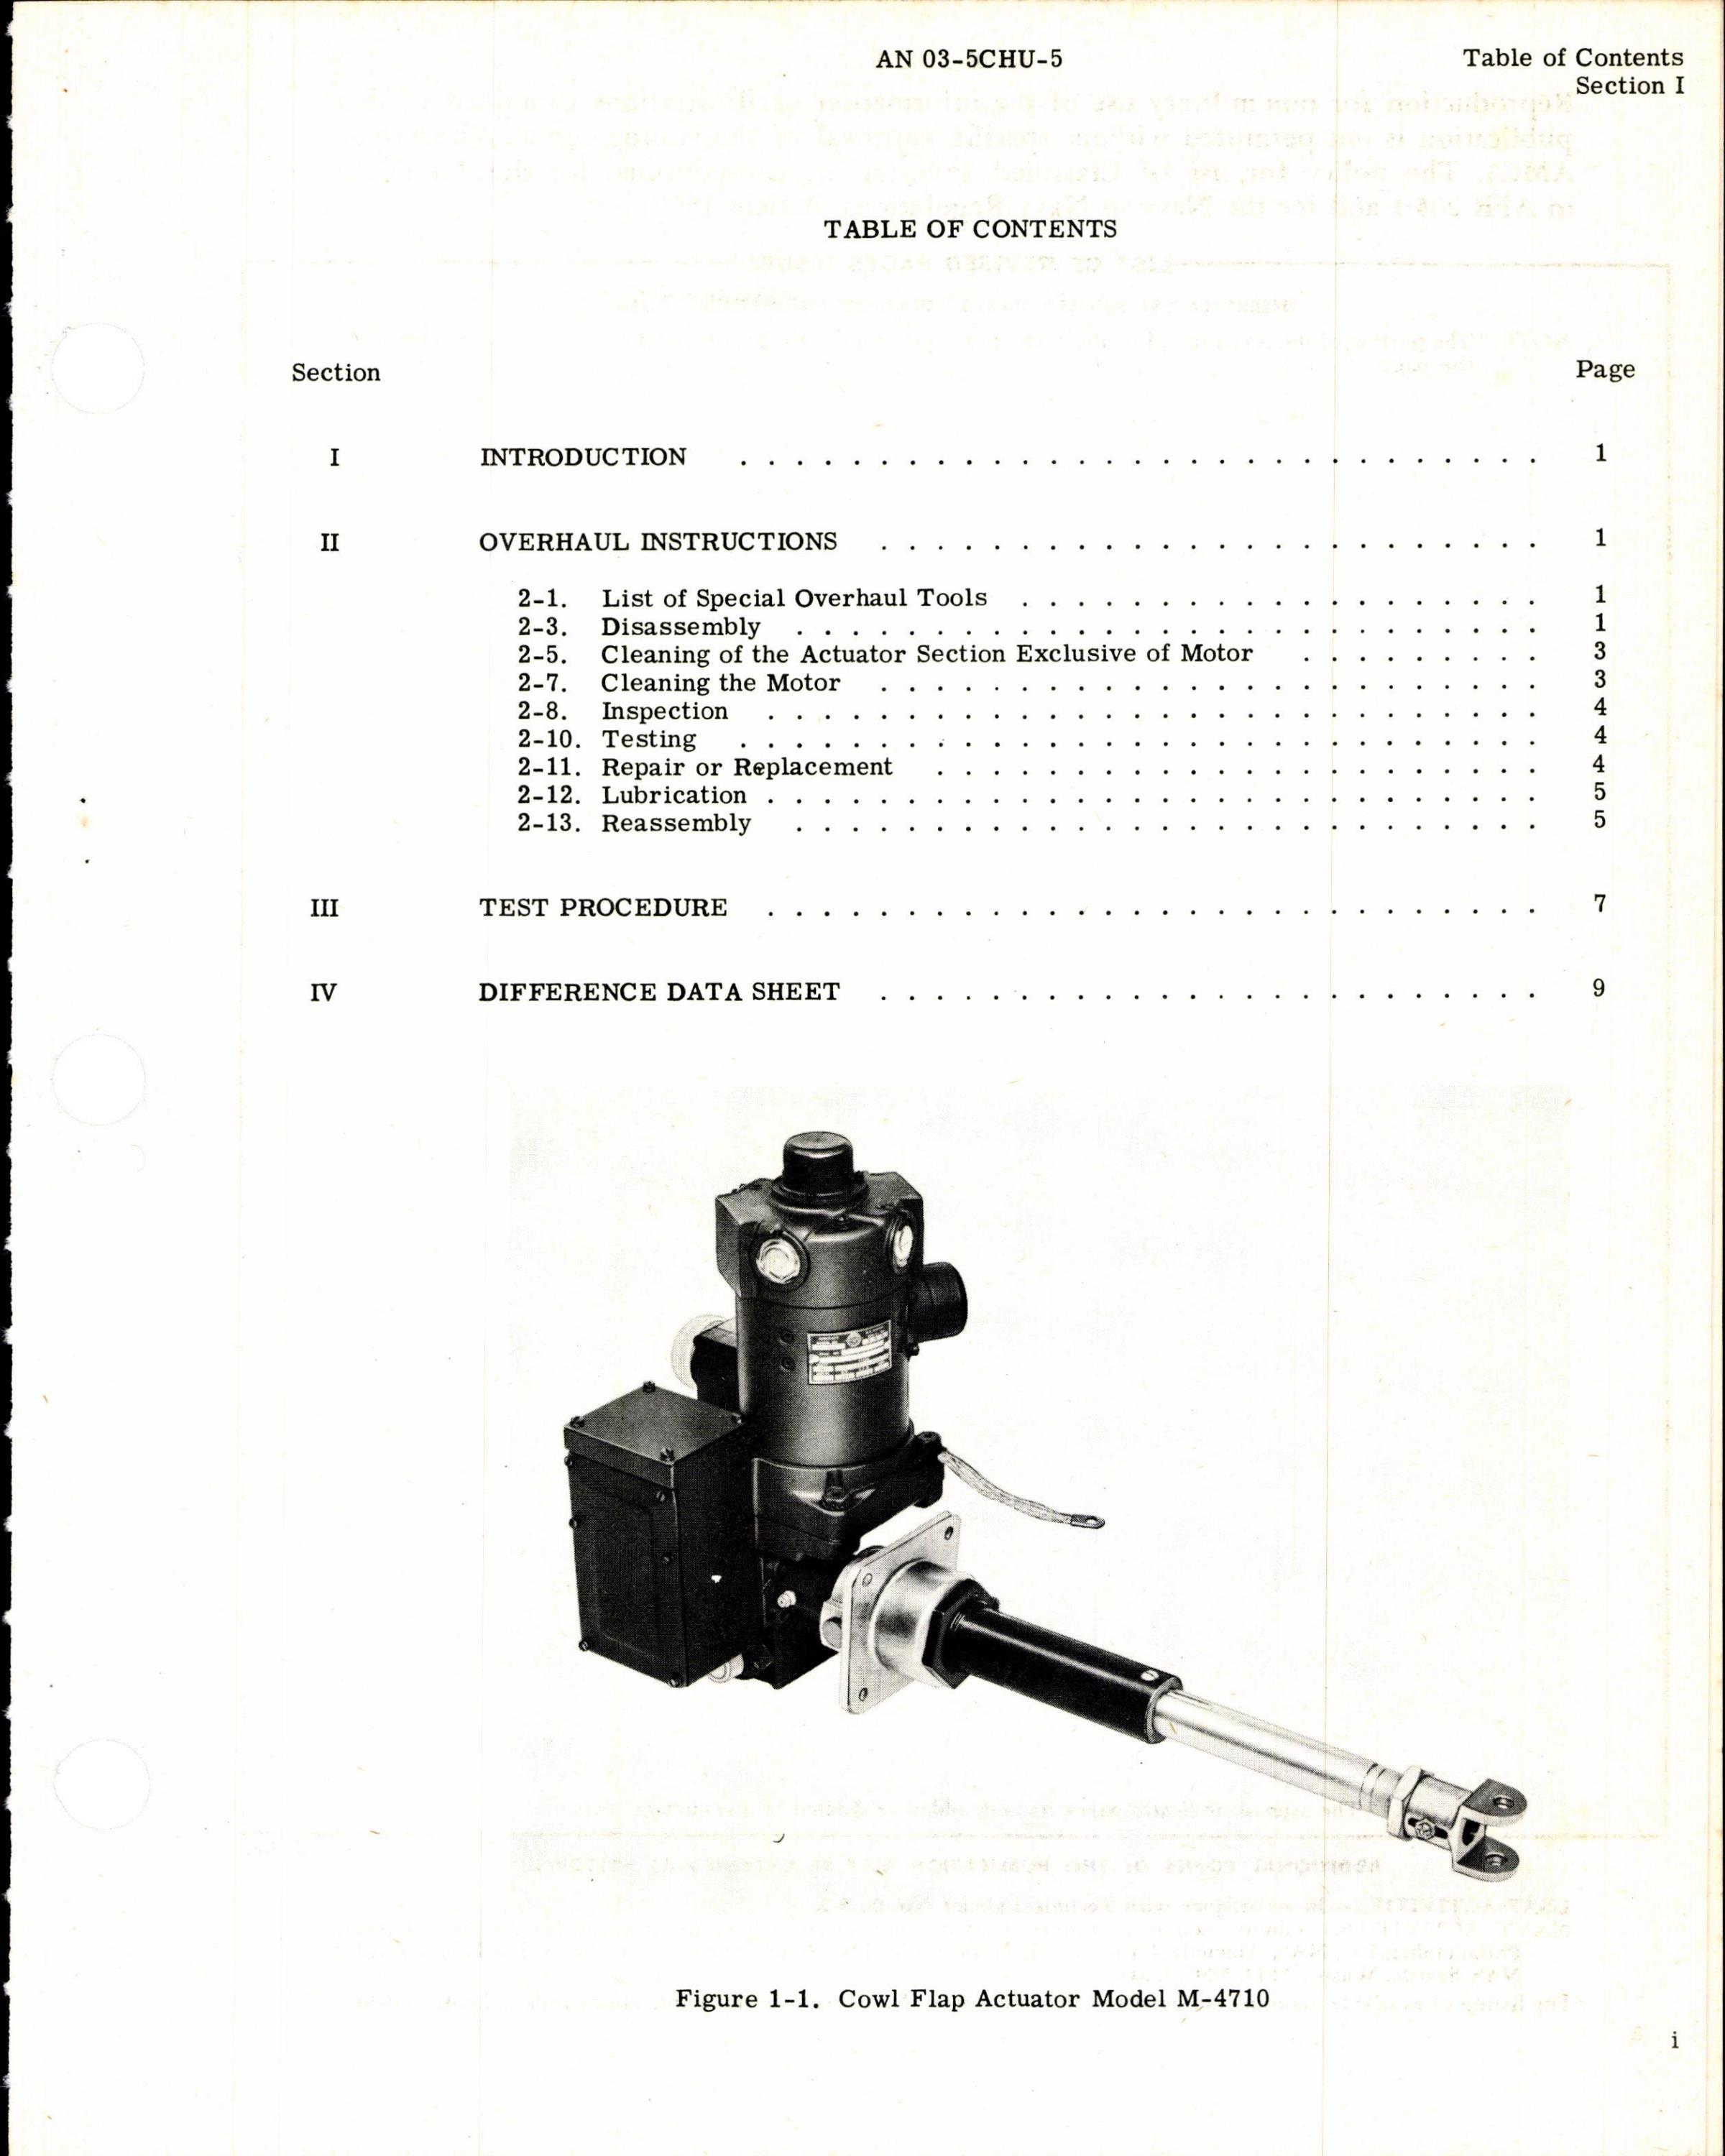 Sample page 3 from AirCorps Library document: Overhaul Instructions Cowl Flap Actuator